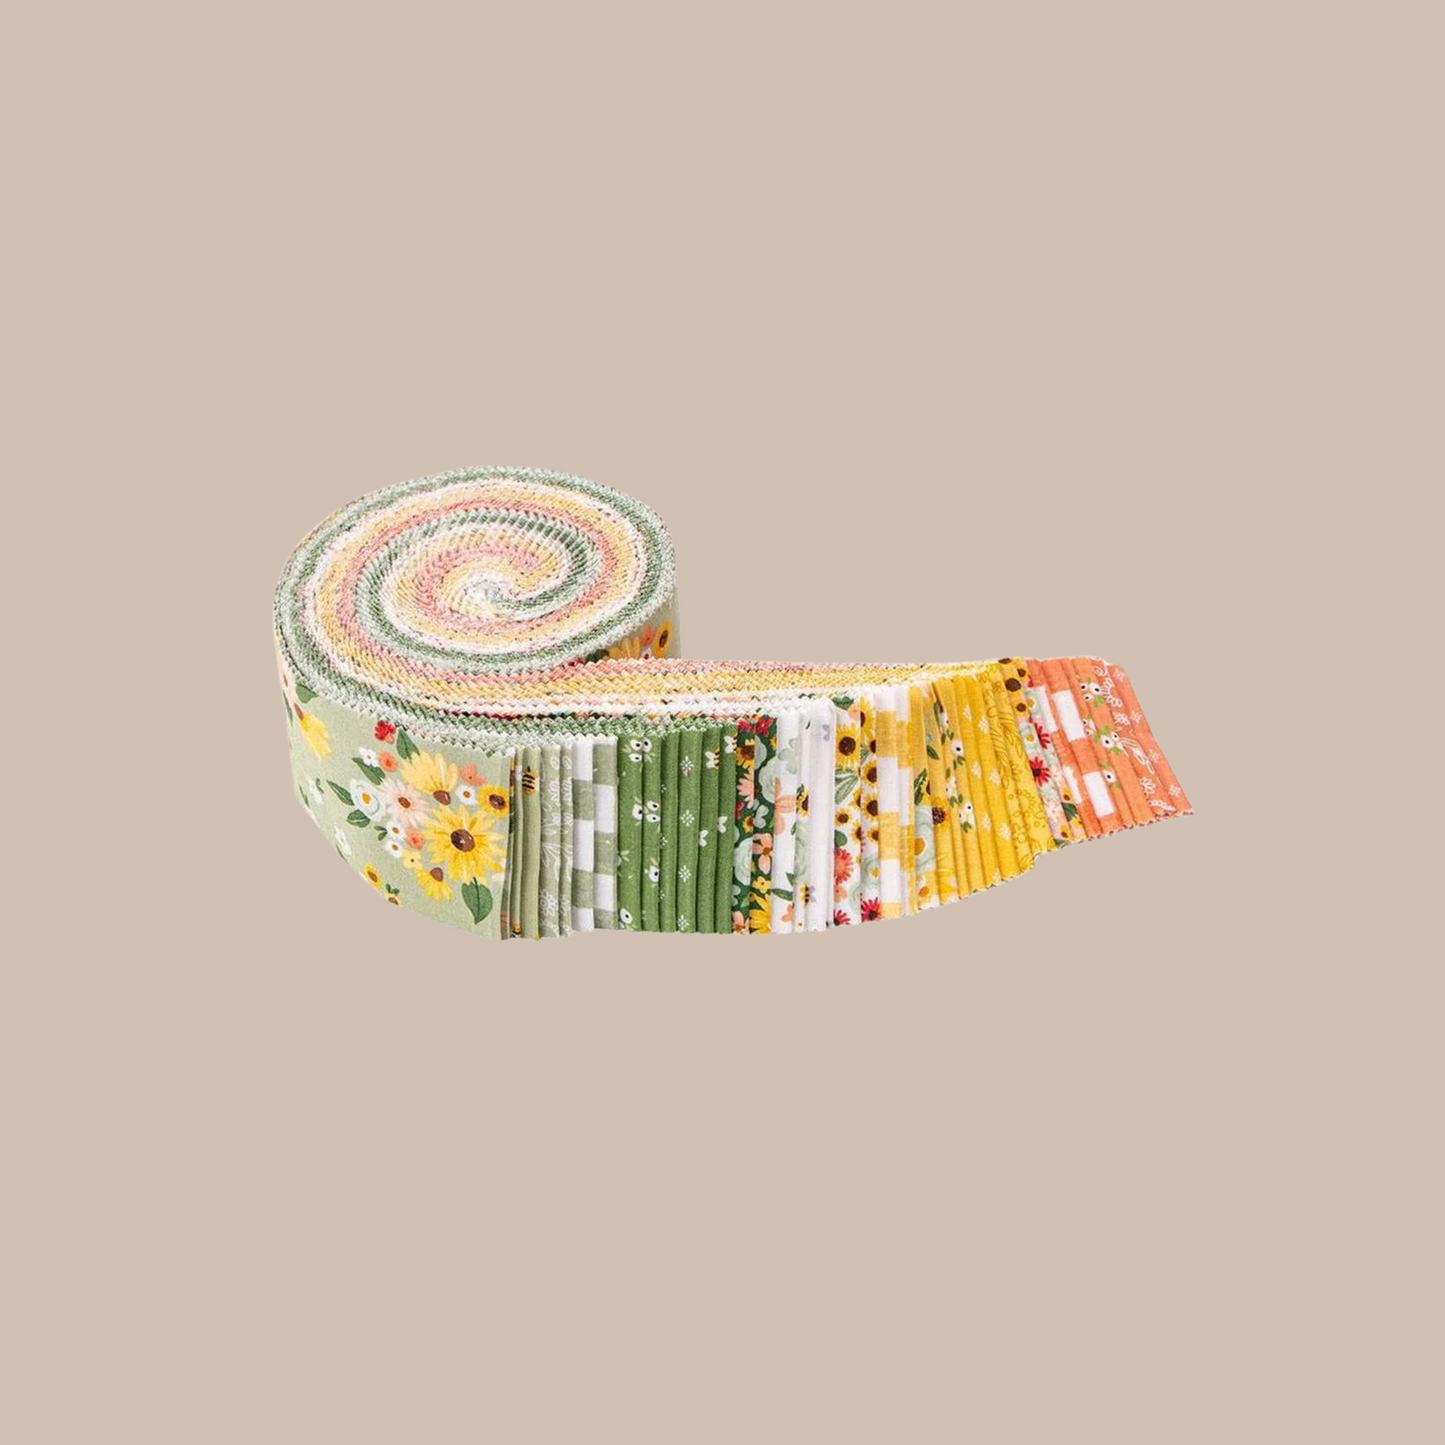 Homemade for Riley Blake Rolie Polie Jelly Roll by Echo Park Paper Co